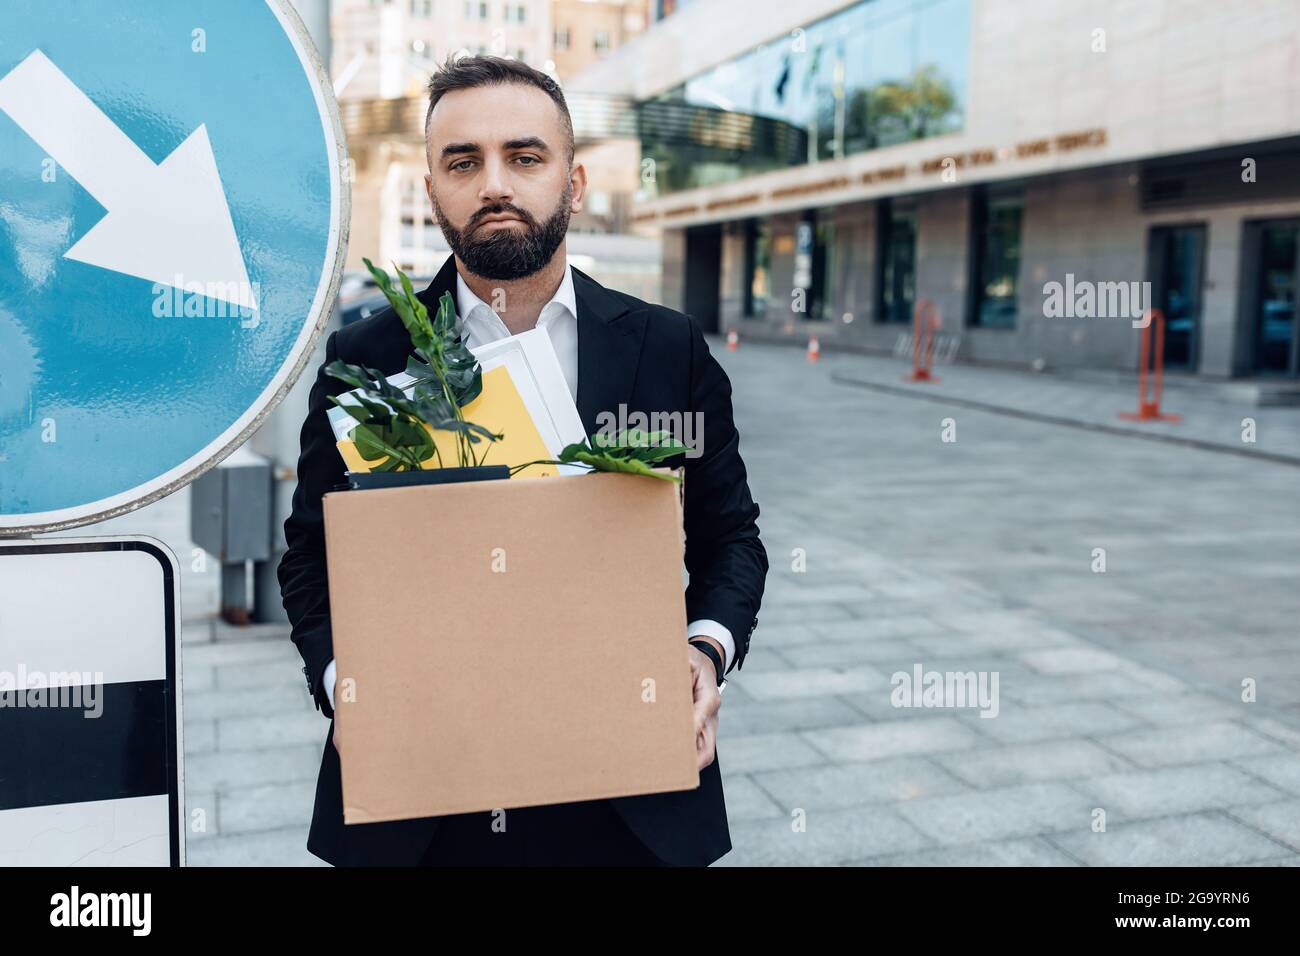 Depressed jobless person. Businessman standing with box of stuff outdoors near road sign, free space Stock Photo